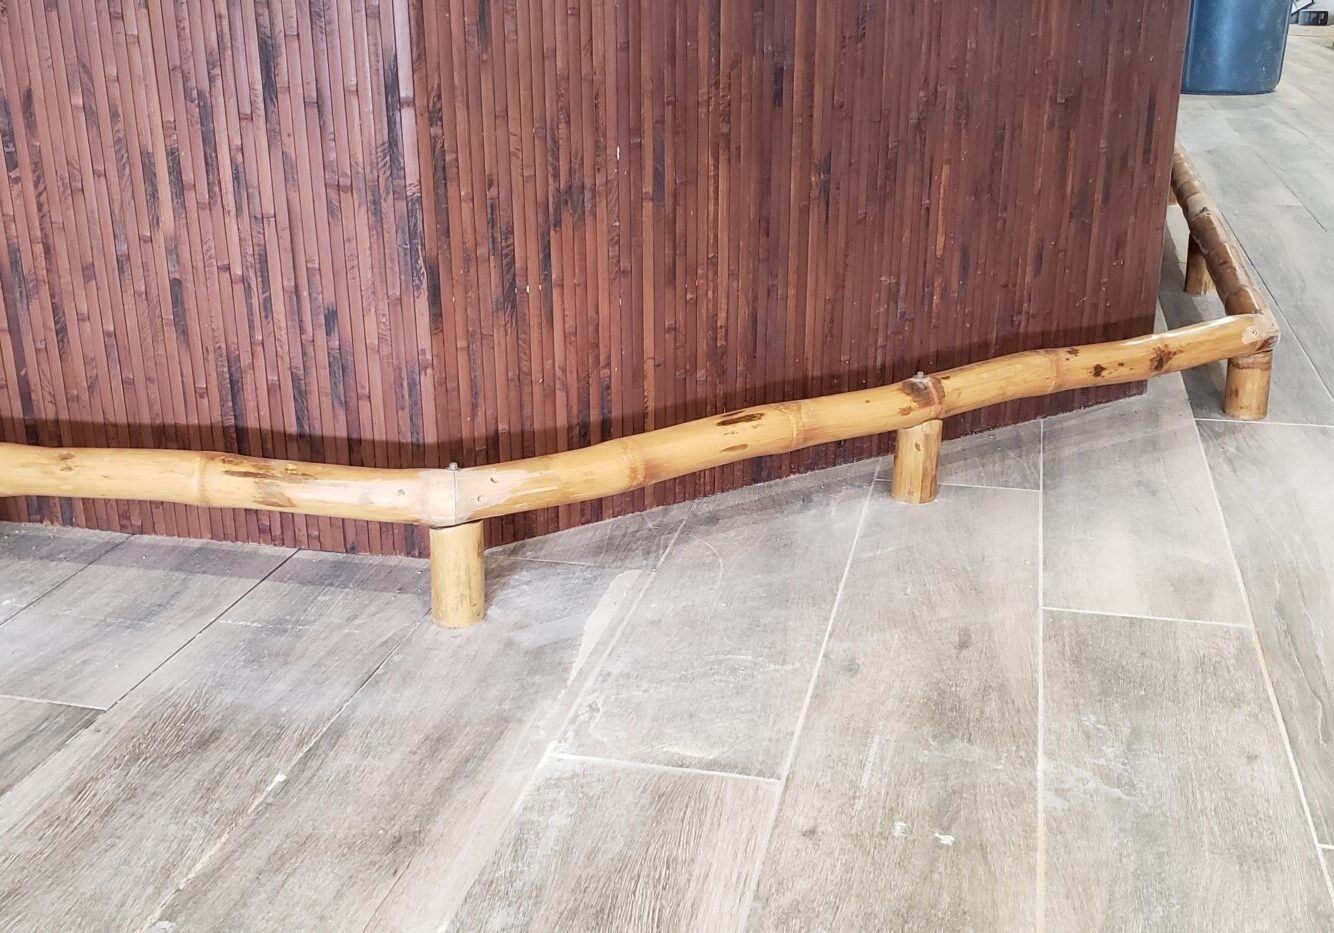 A wooden bench in a room with a wooden floor.